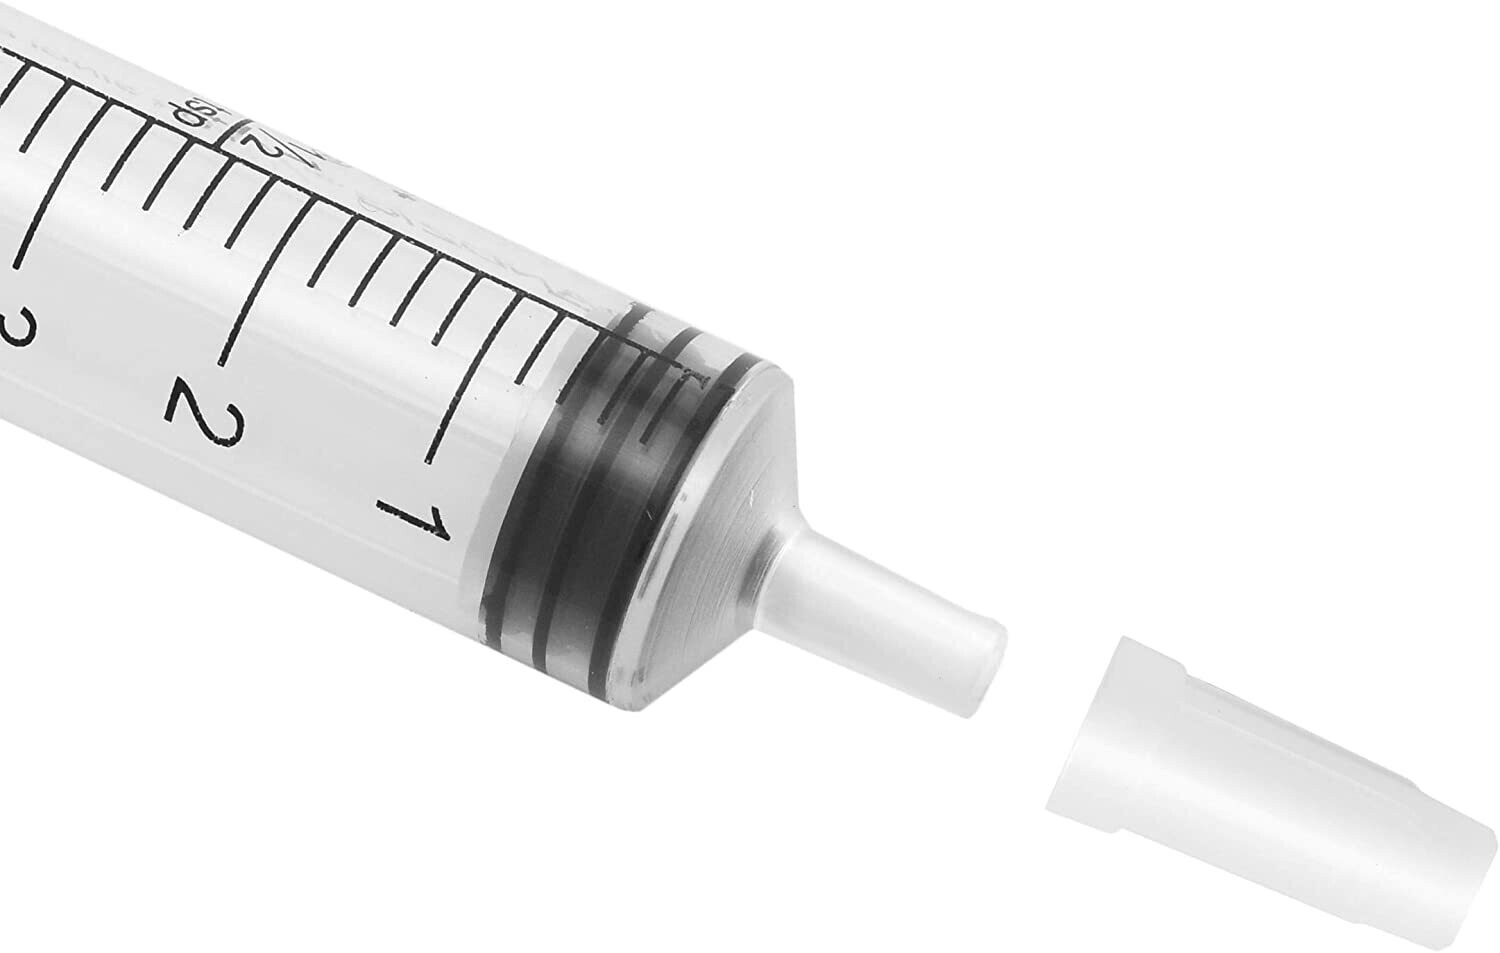 Oral Syringes with cap